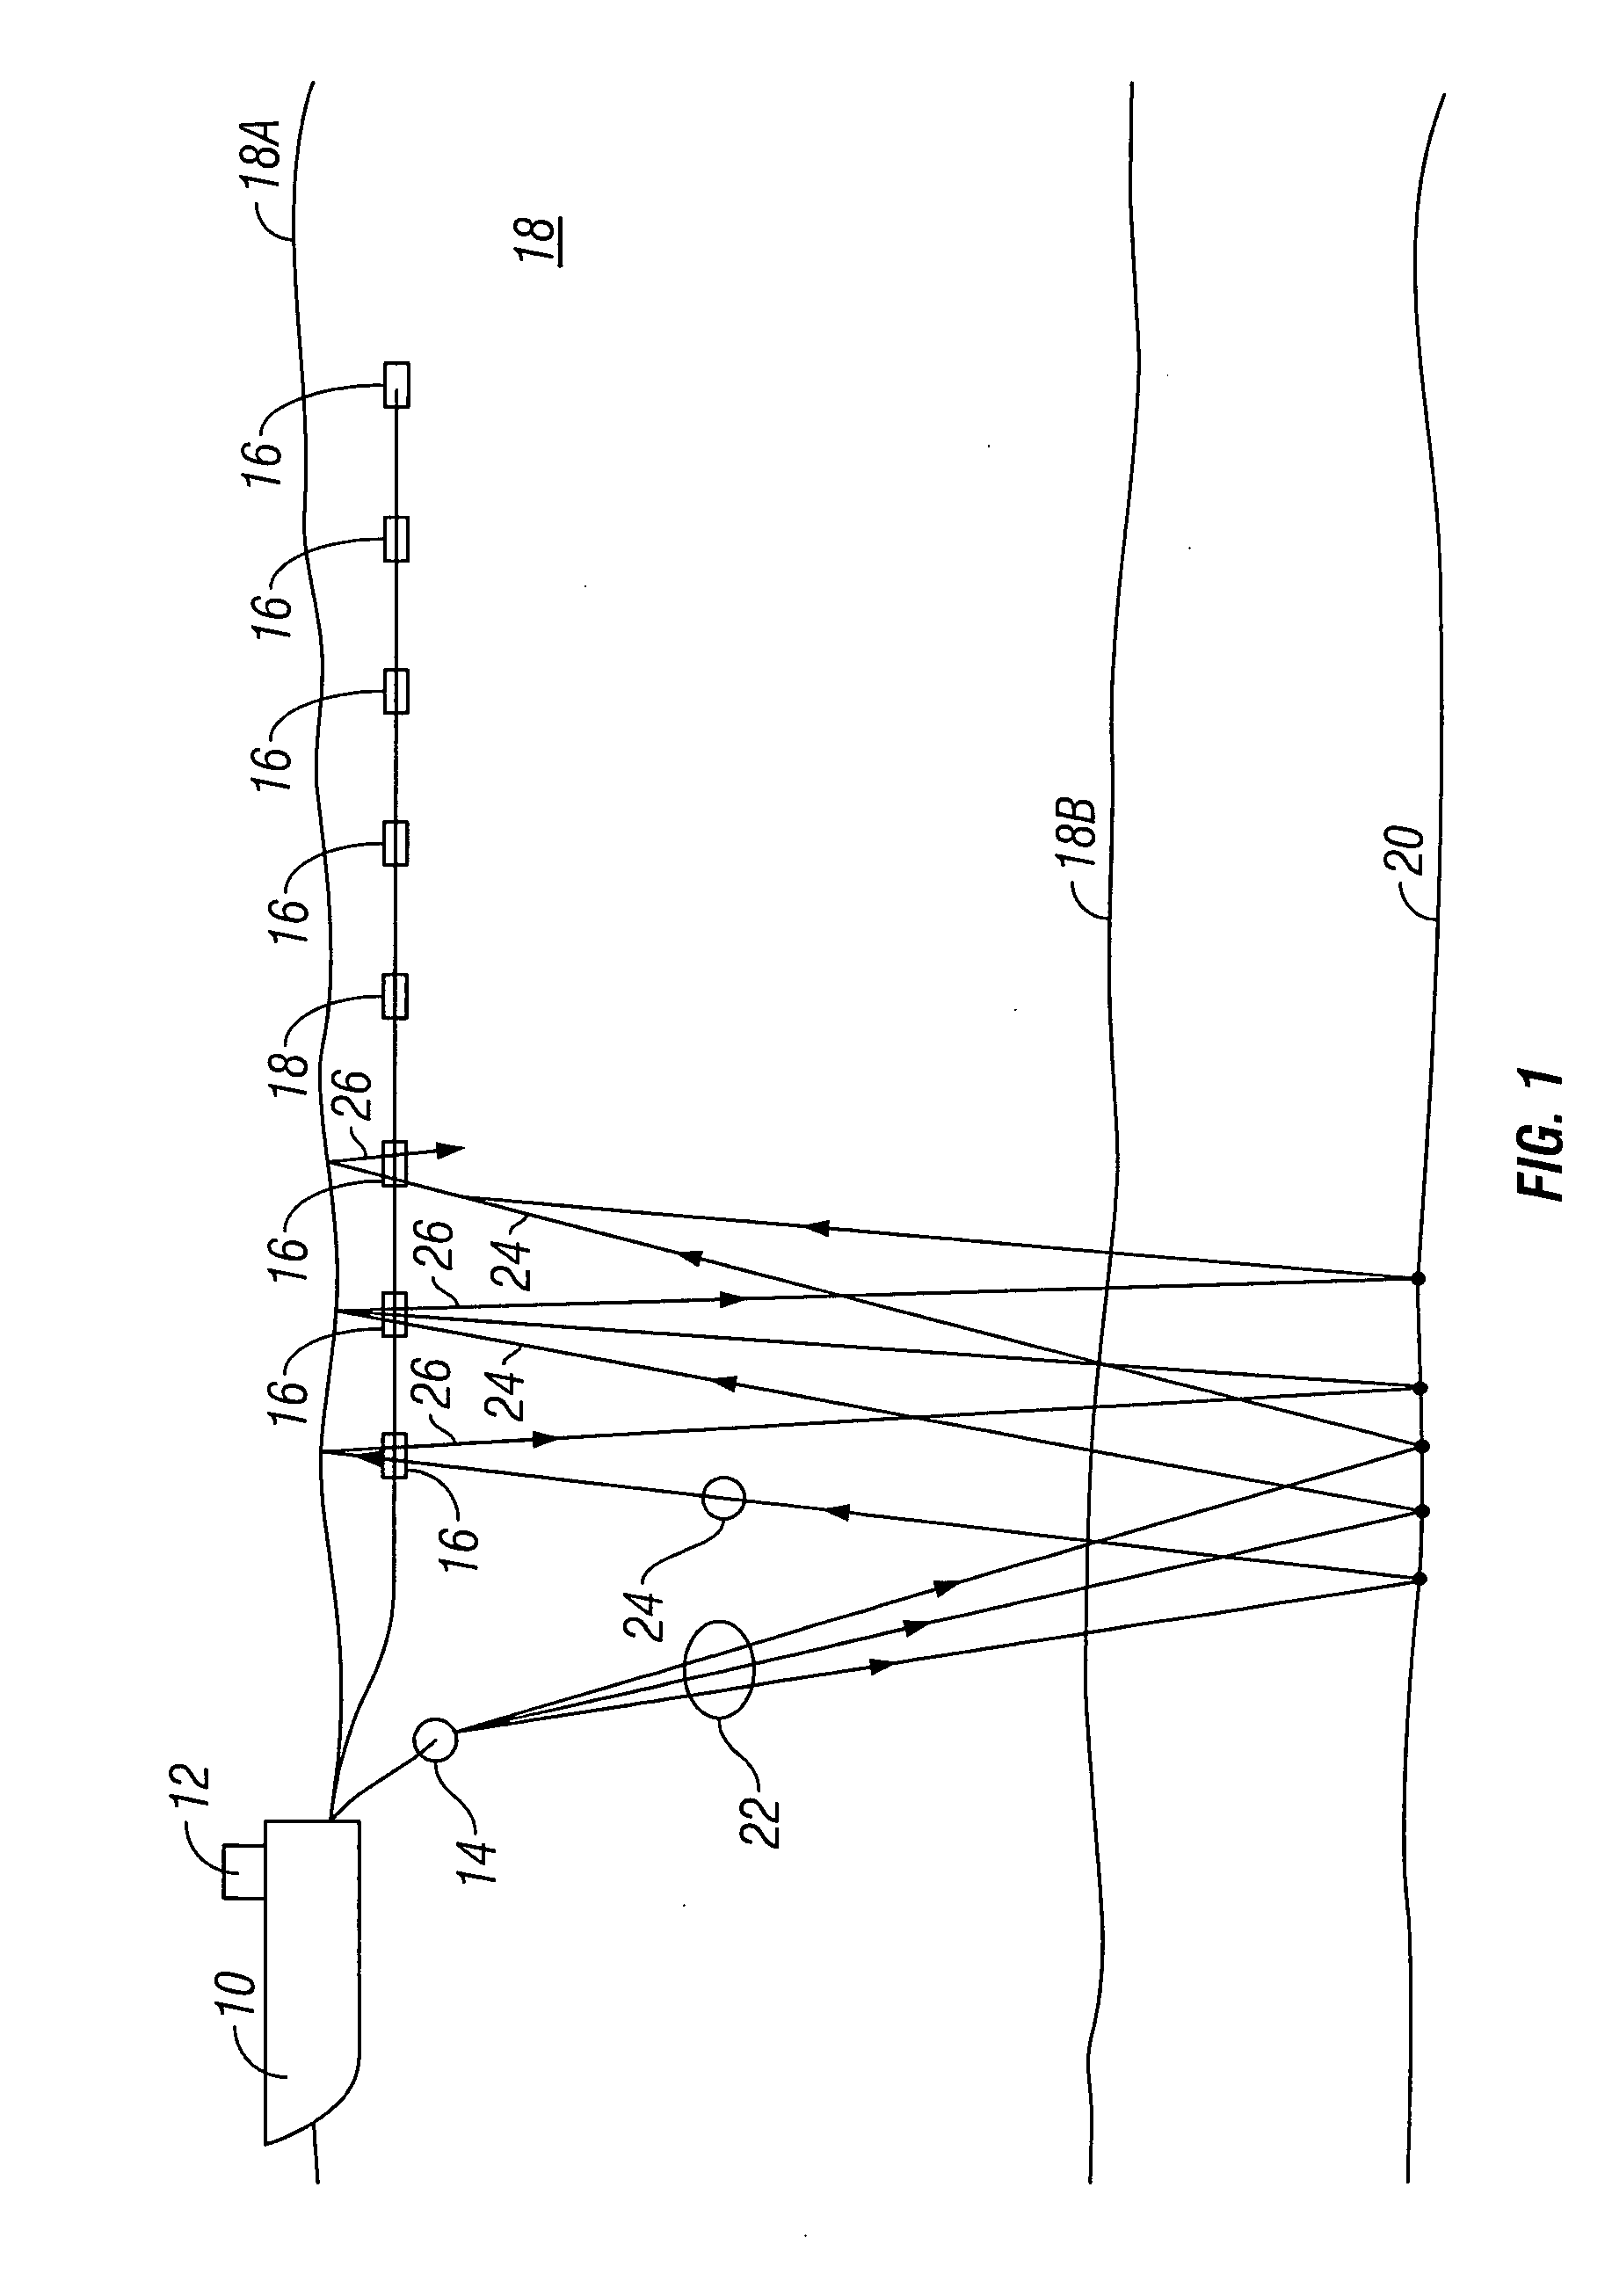 Method for attenuation of multiple reflections in seismic data